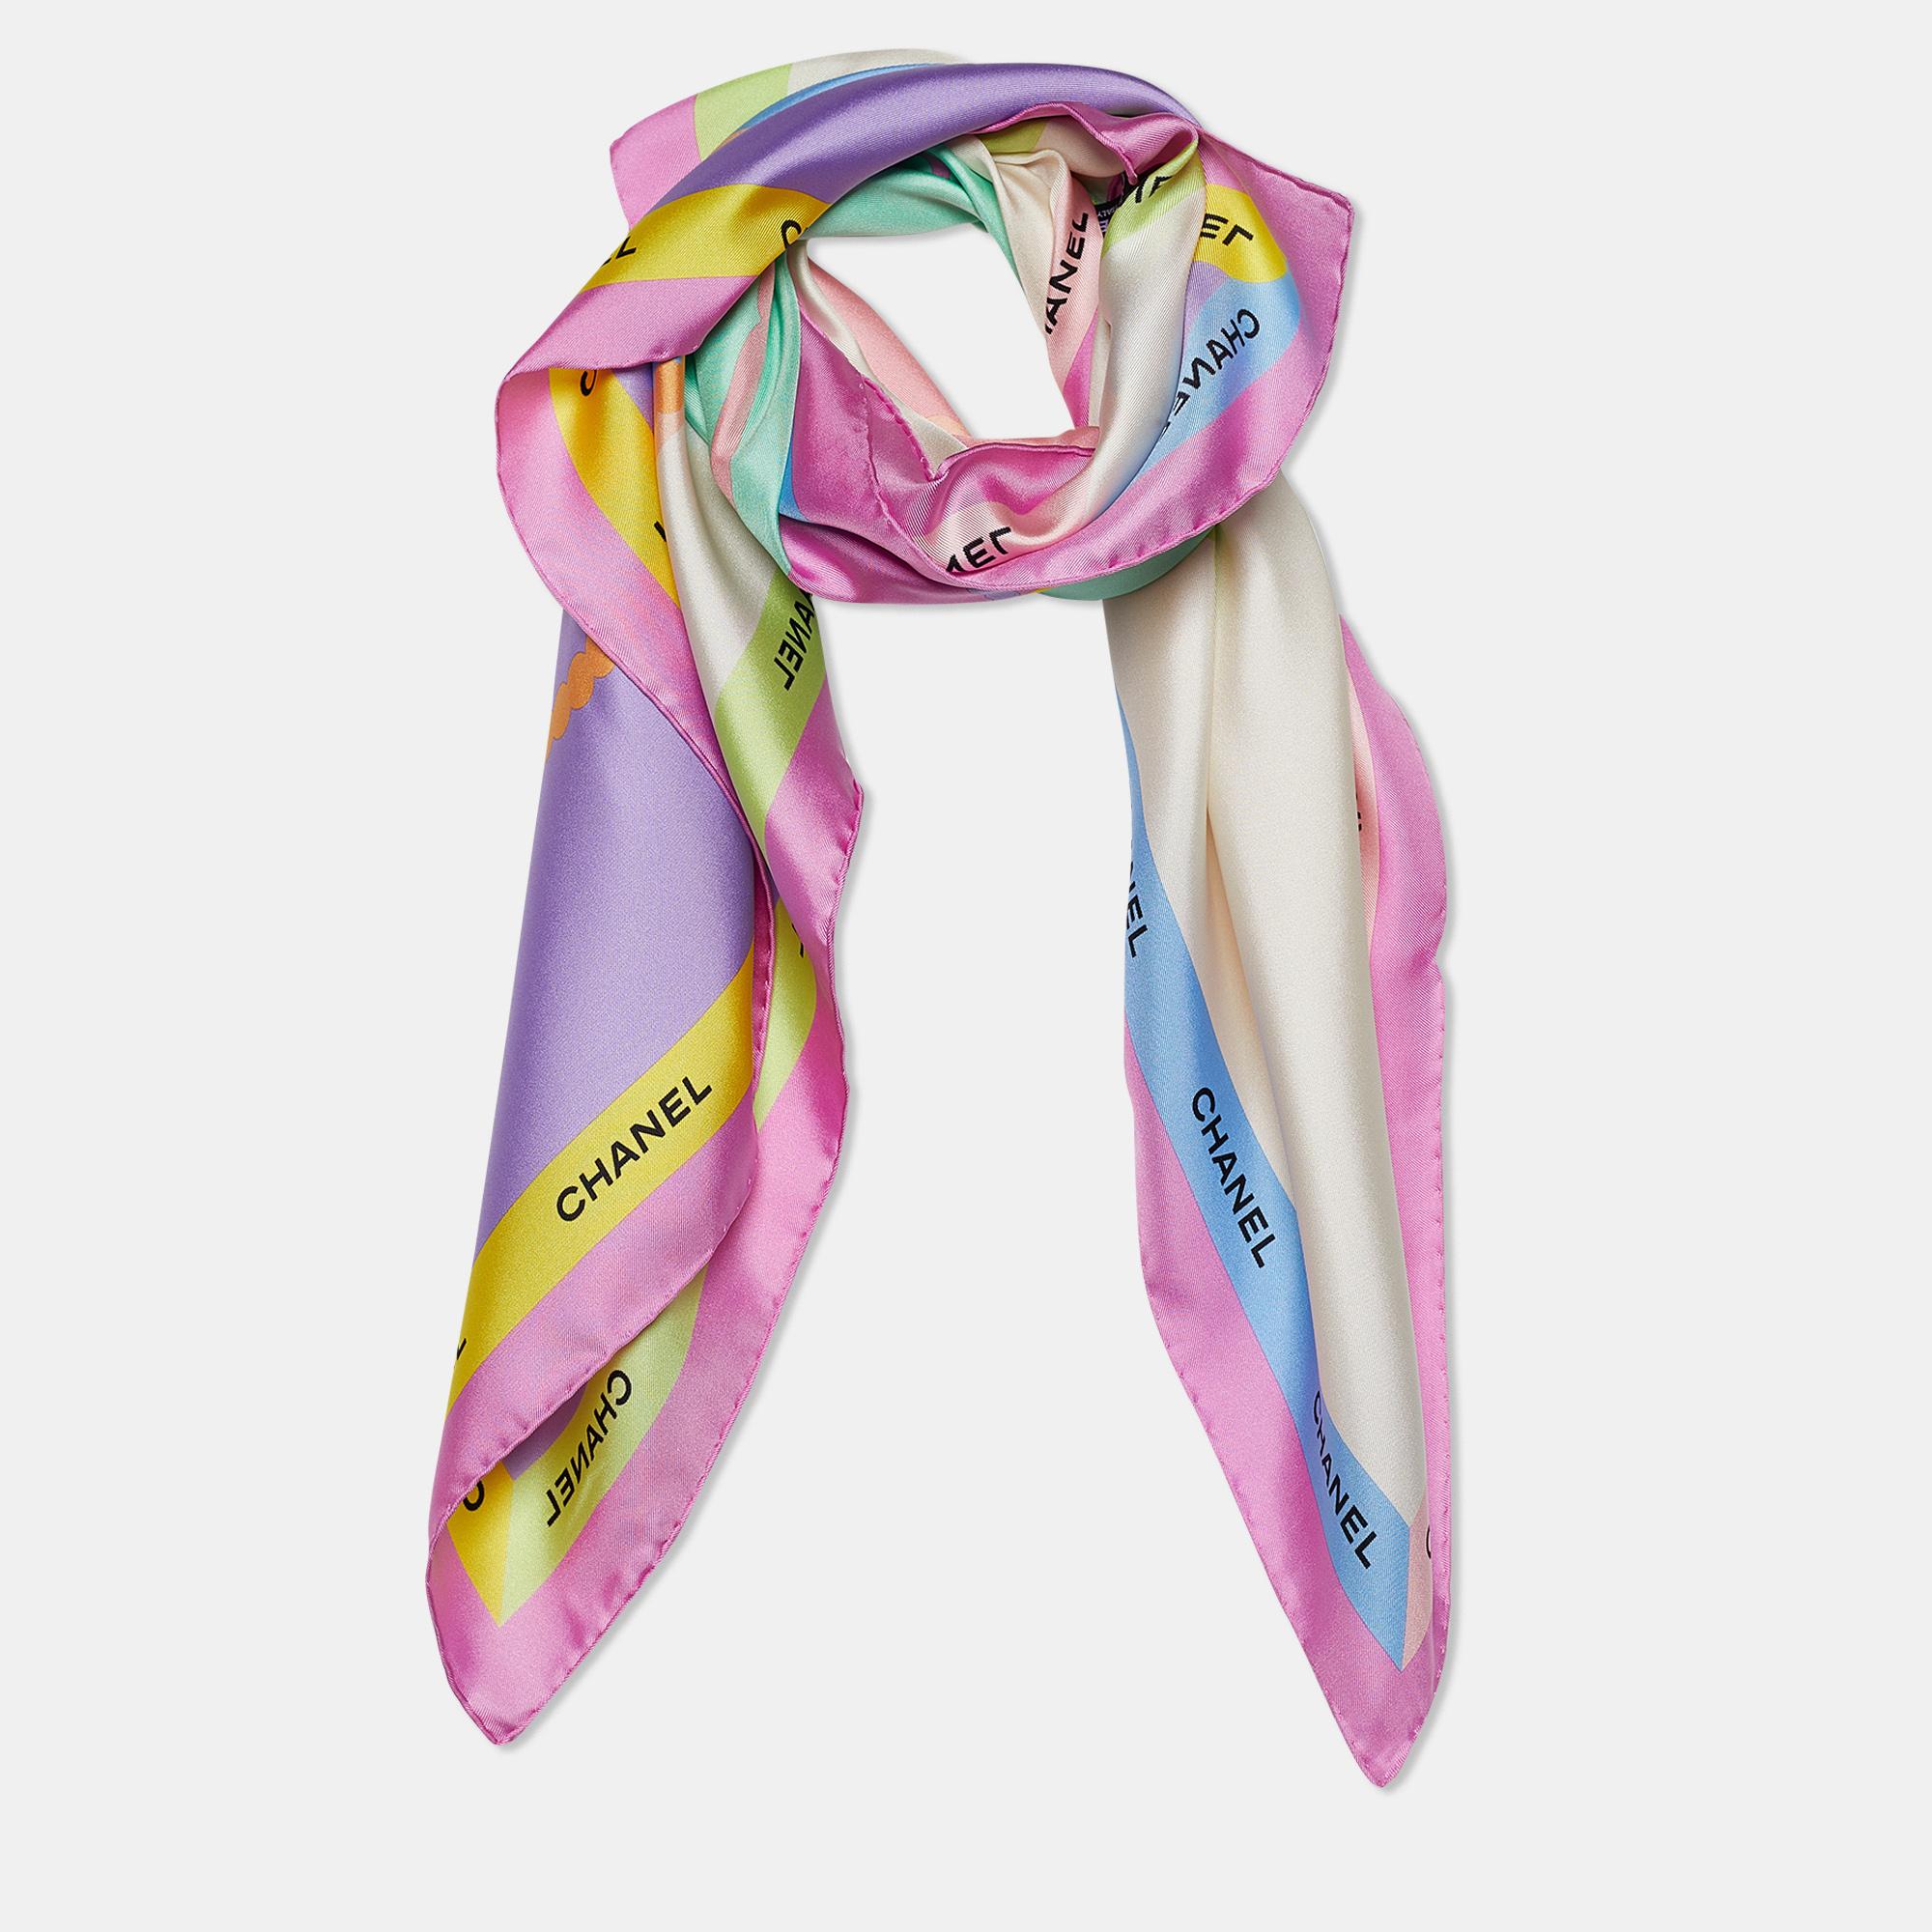 The perfect punctuation to your stylish look will be this Chanel scarf! It has been stitched using soft silk and adorned with Chanel handbag prints for a signature touch. Wrap it around your neck to accessorize the chic way!

